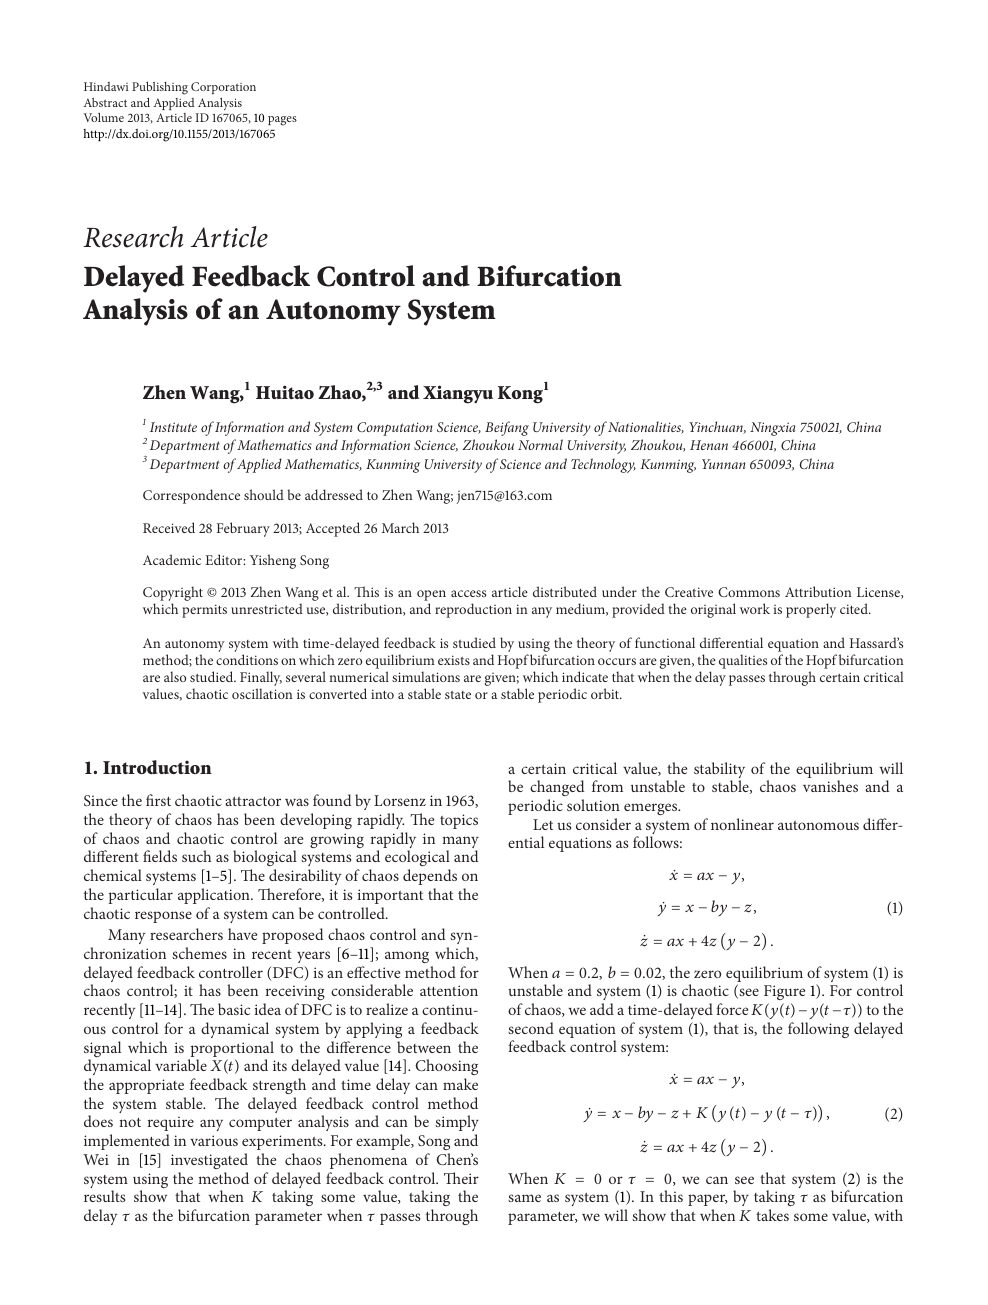 Delayed Feedback Control And Bifurcation Analysis Of An Autonomy System Topic Of Research Paper In Mathematics Download Scholarly Article Pdf And Read For Free On Cyberleninka Open Science Hub